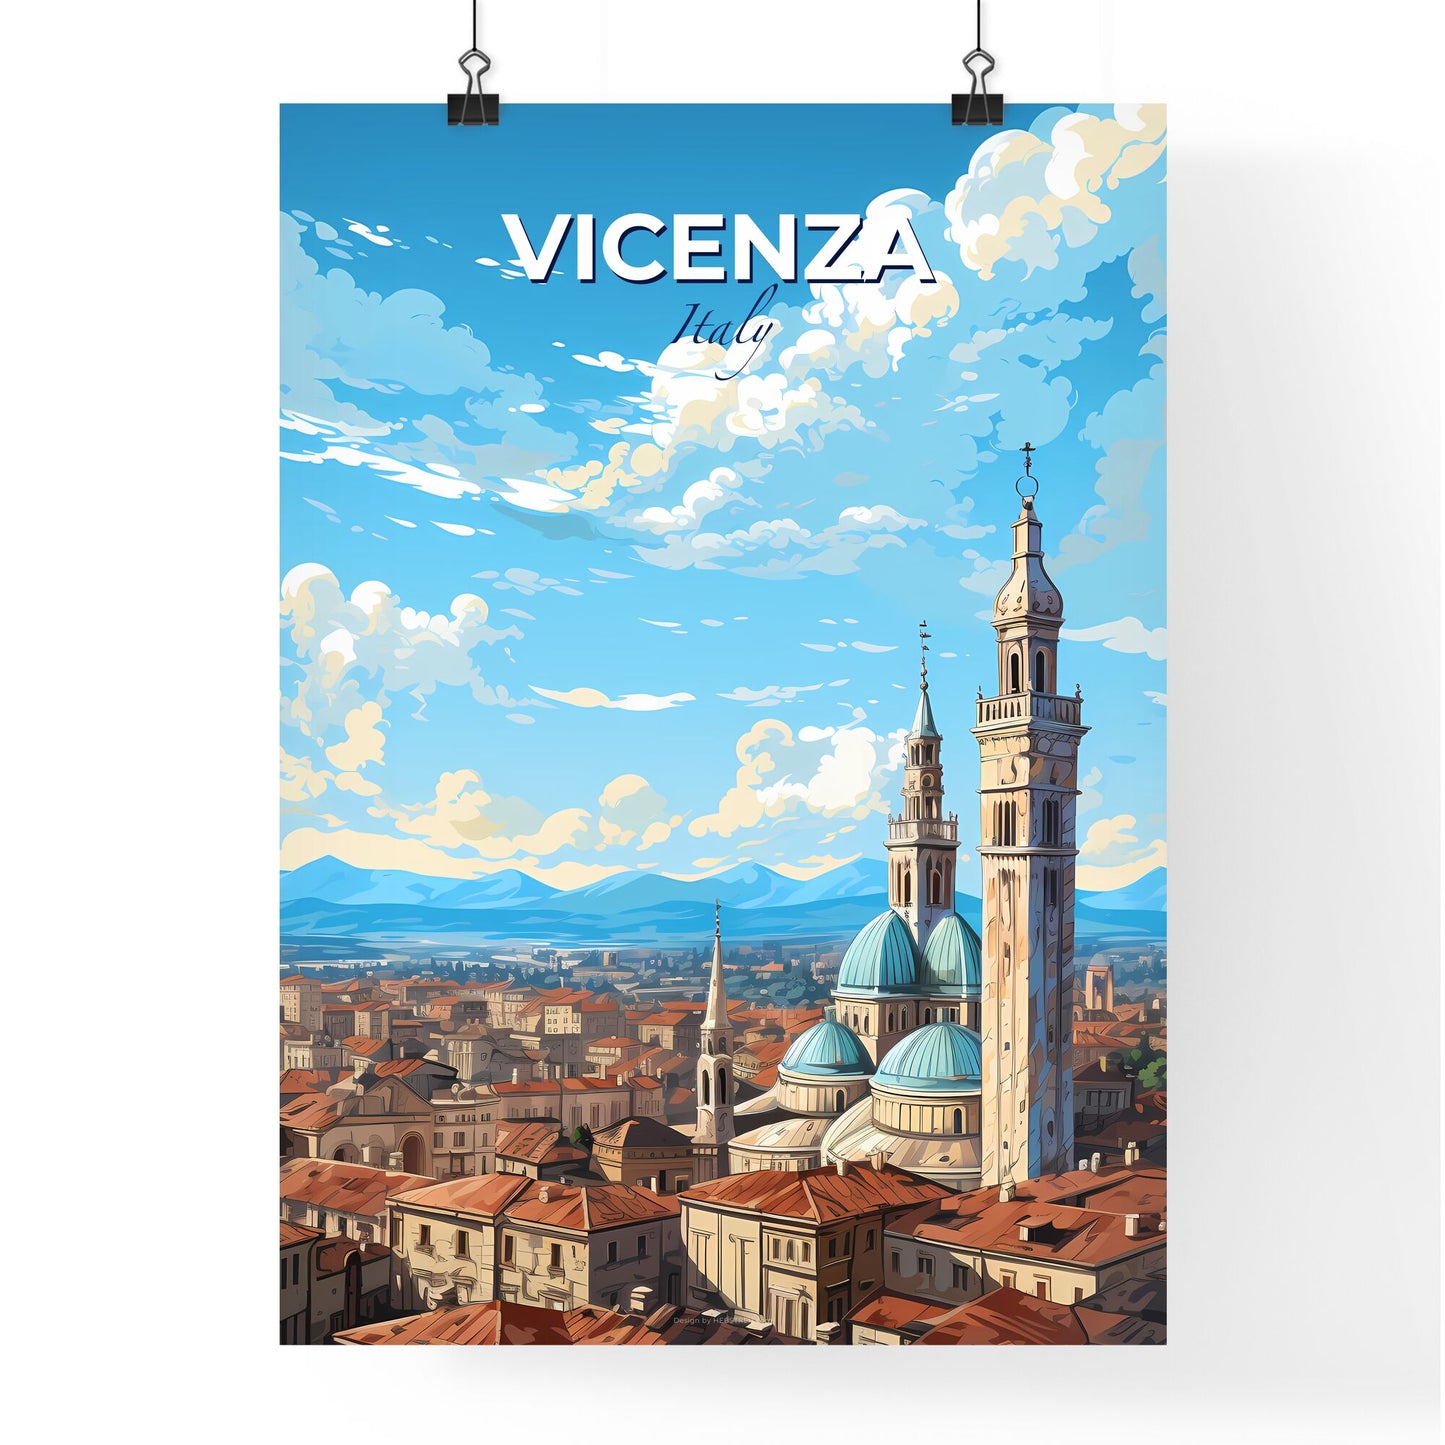 Vicenza Italy Skyline - A Large Building With Towers And A Steeple - Customizable Travel Gift Default Title